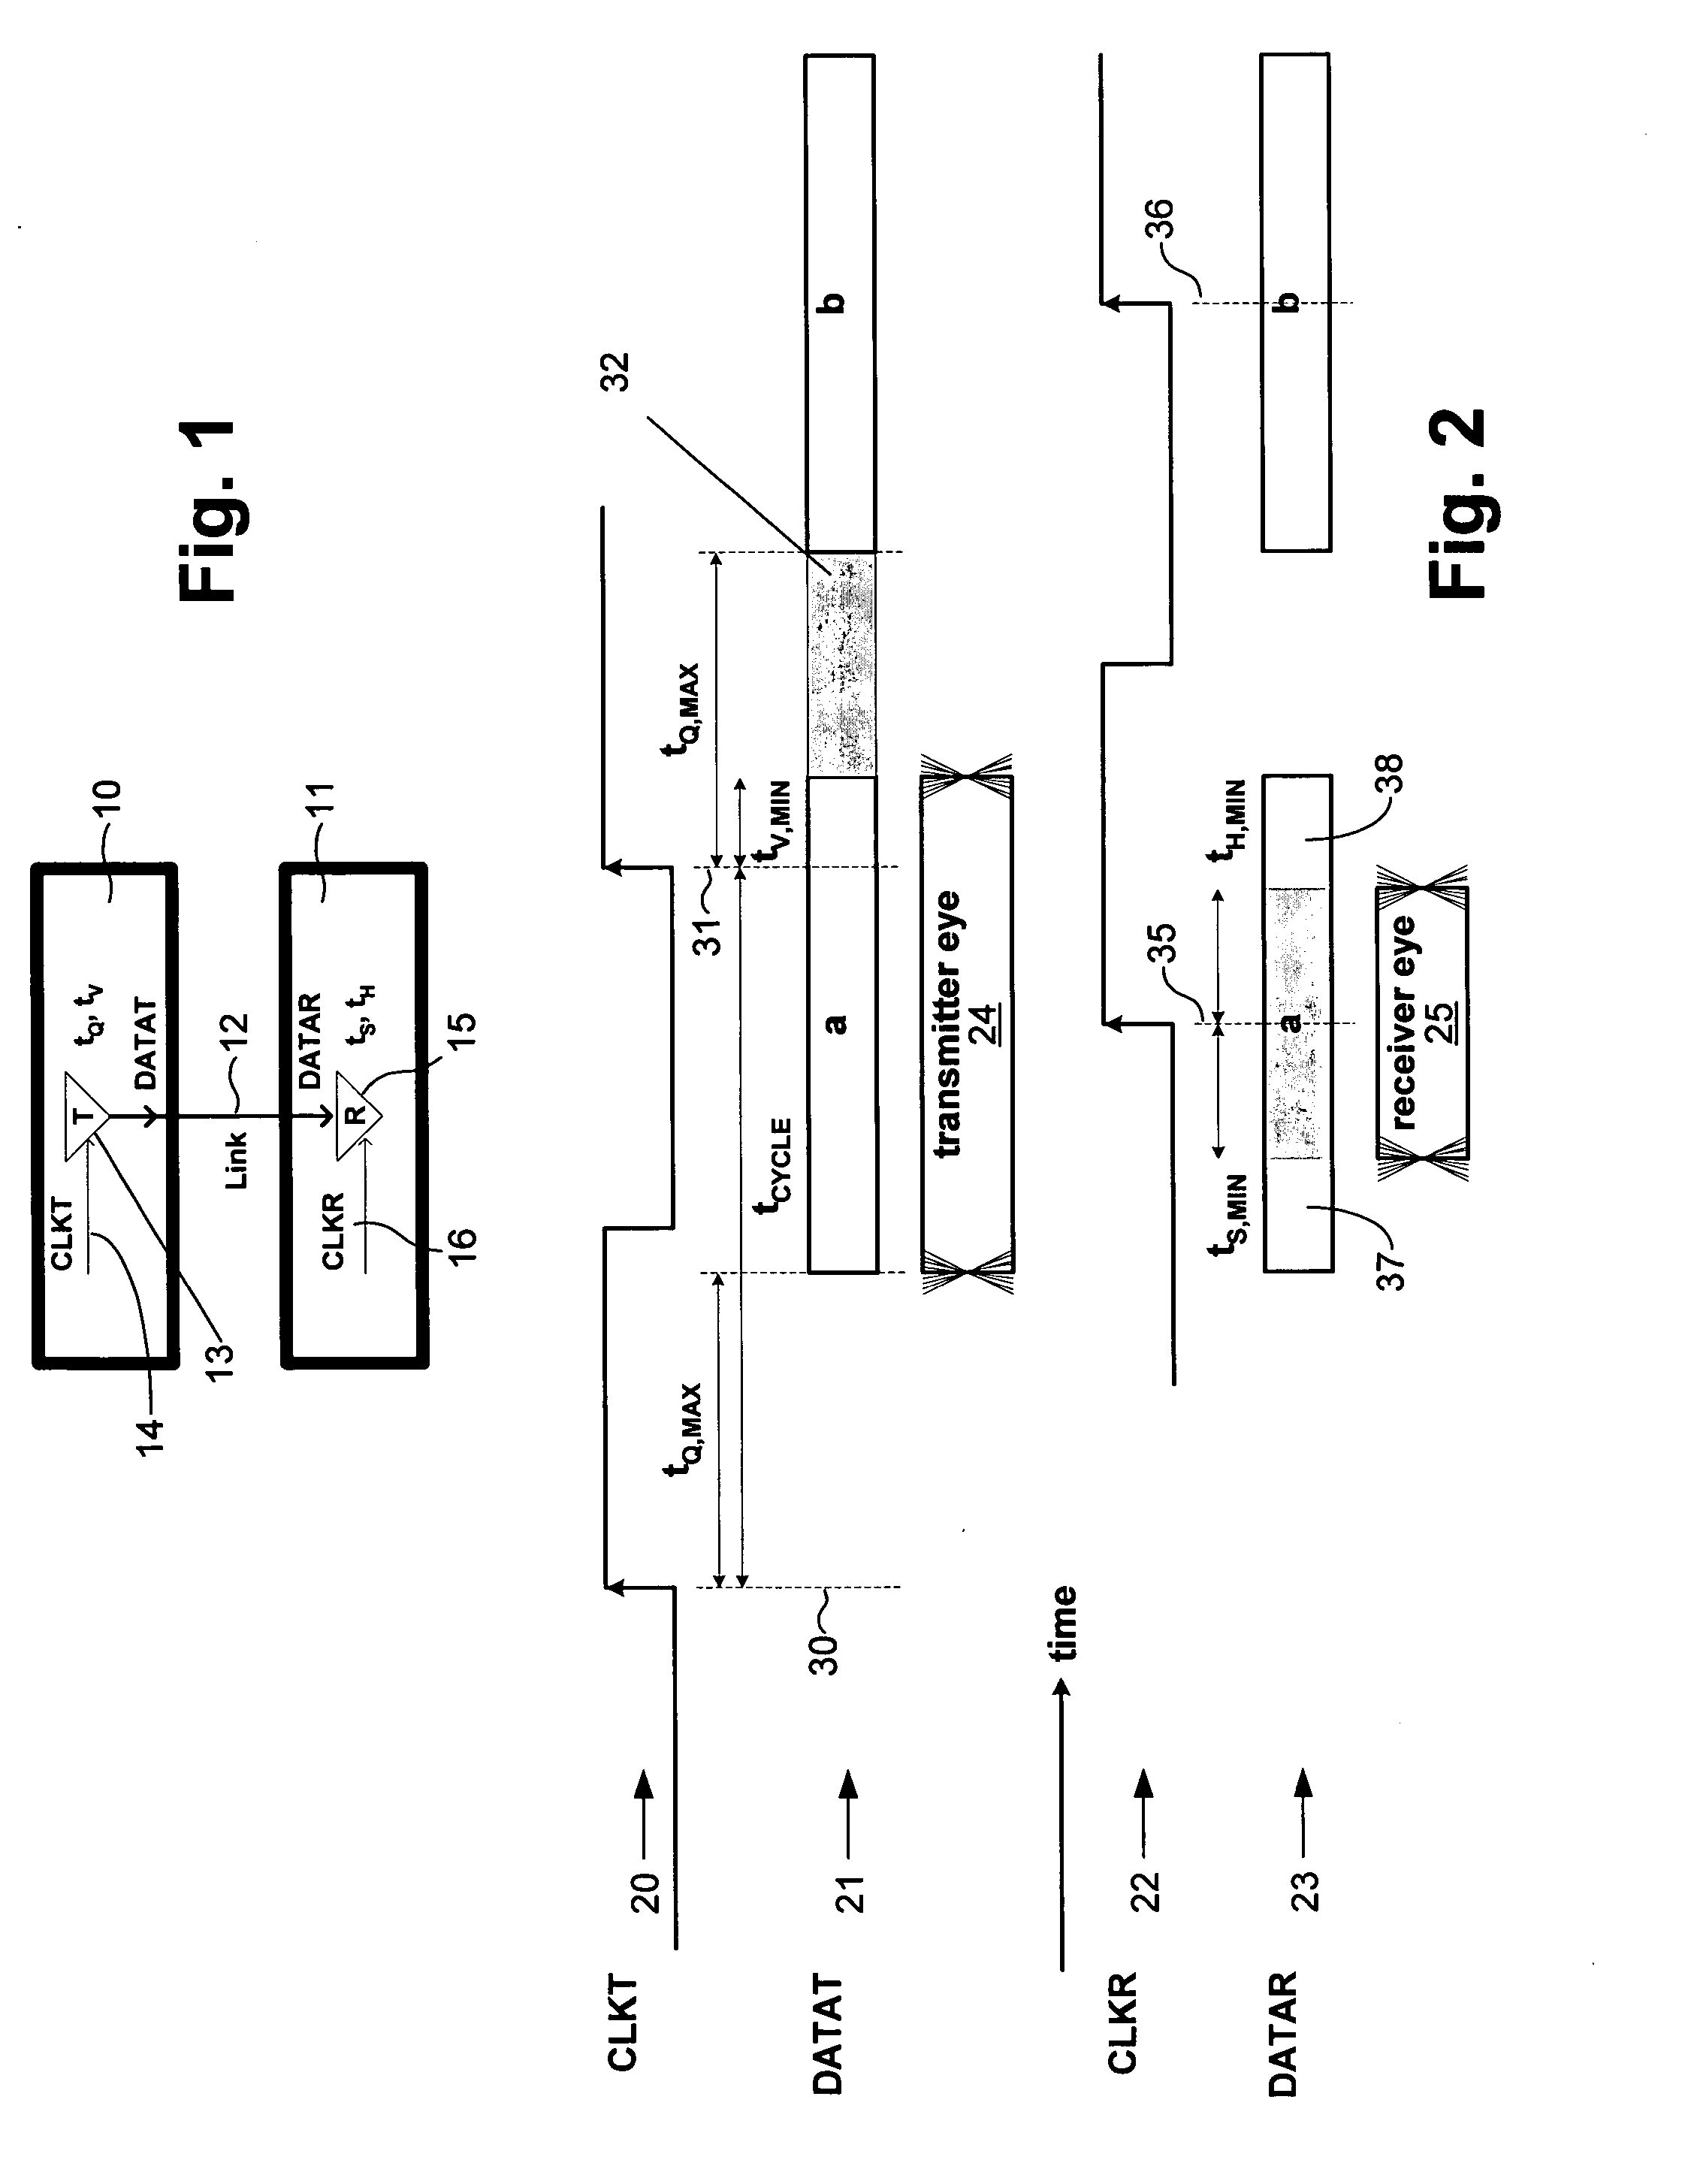 Communication channel calibration for drift conditions